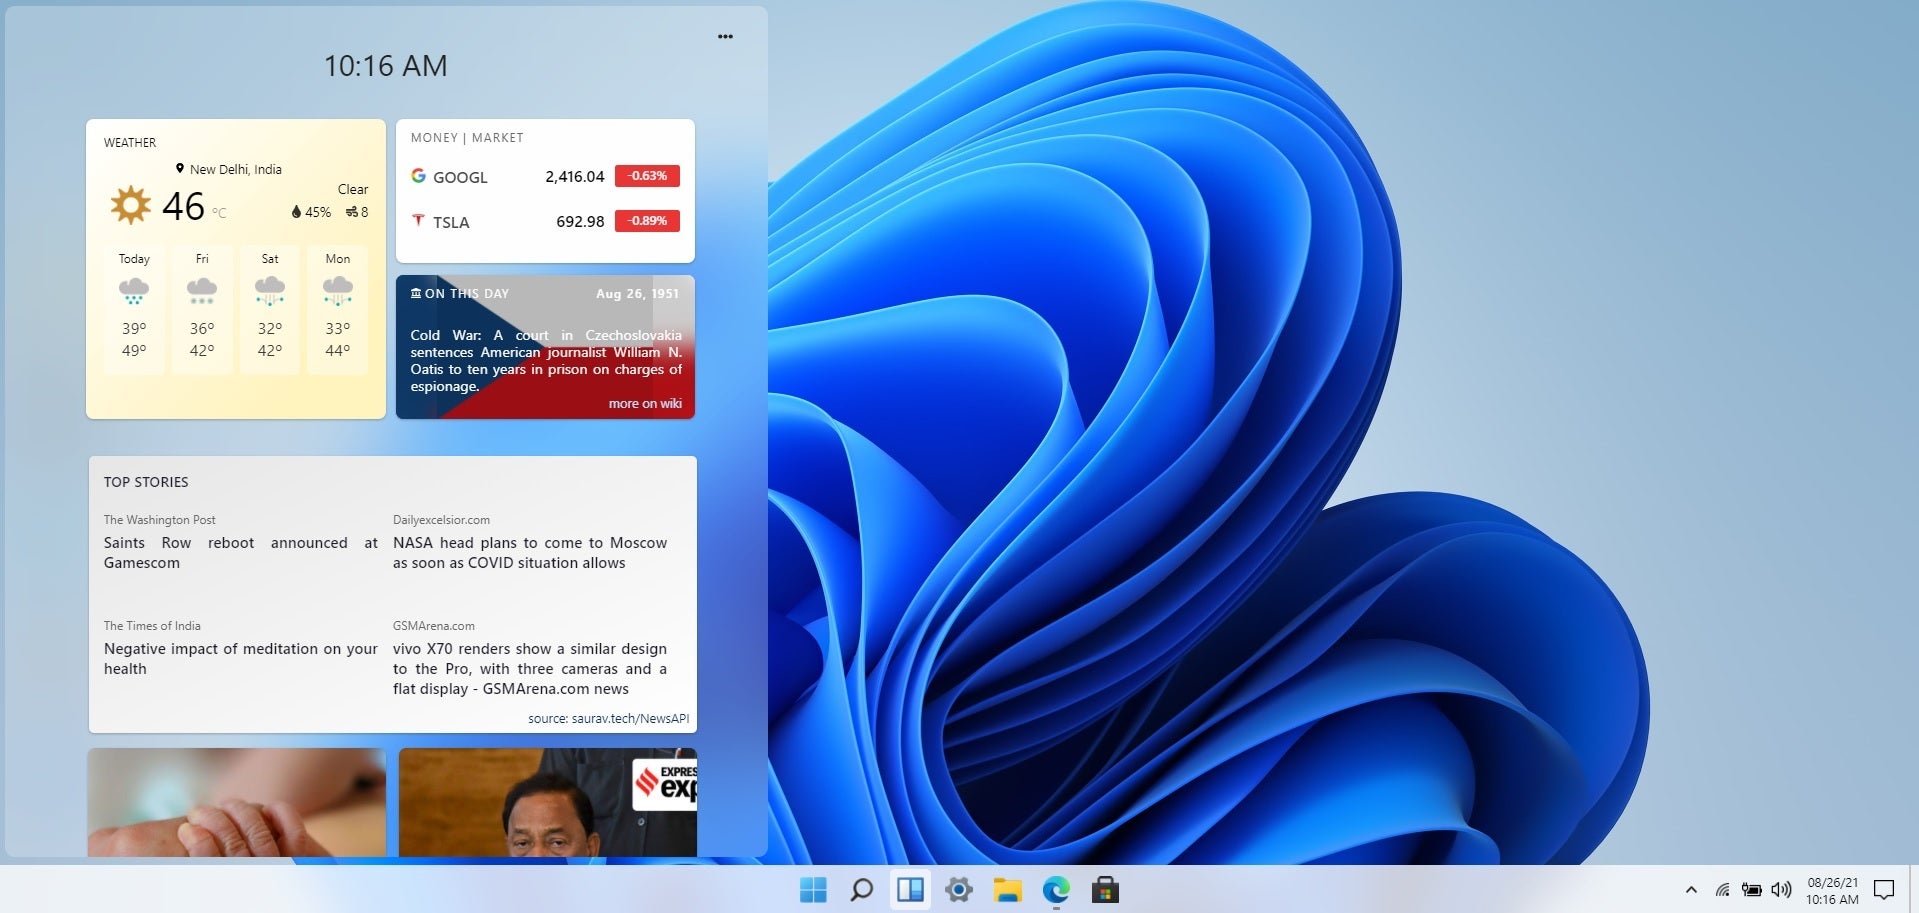 The Windows 11 widget screen as replicated in this simulation - Try out the new Windows 11 interface right on your phone or tablet